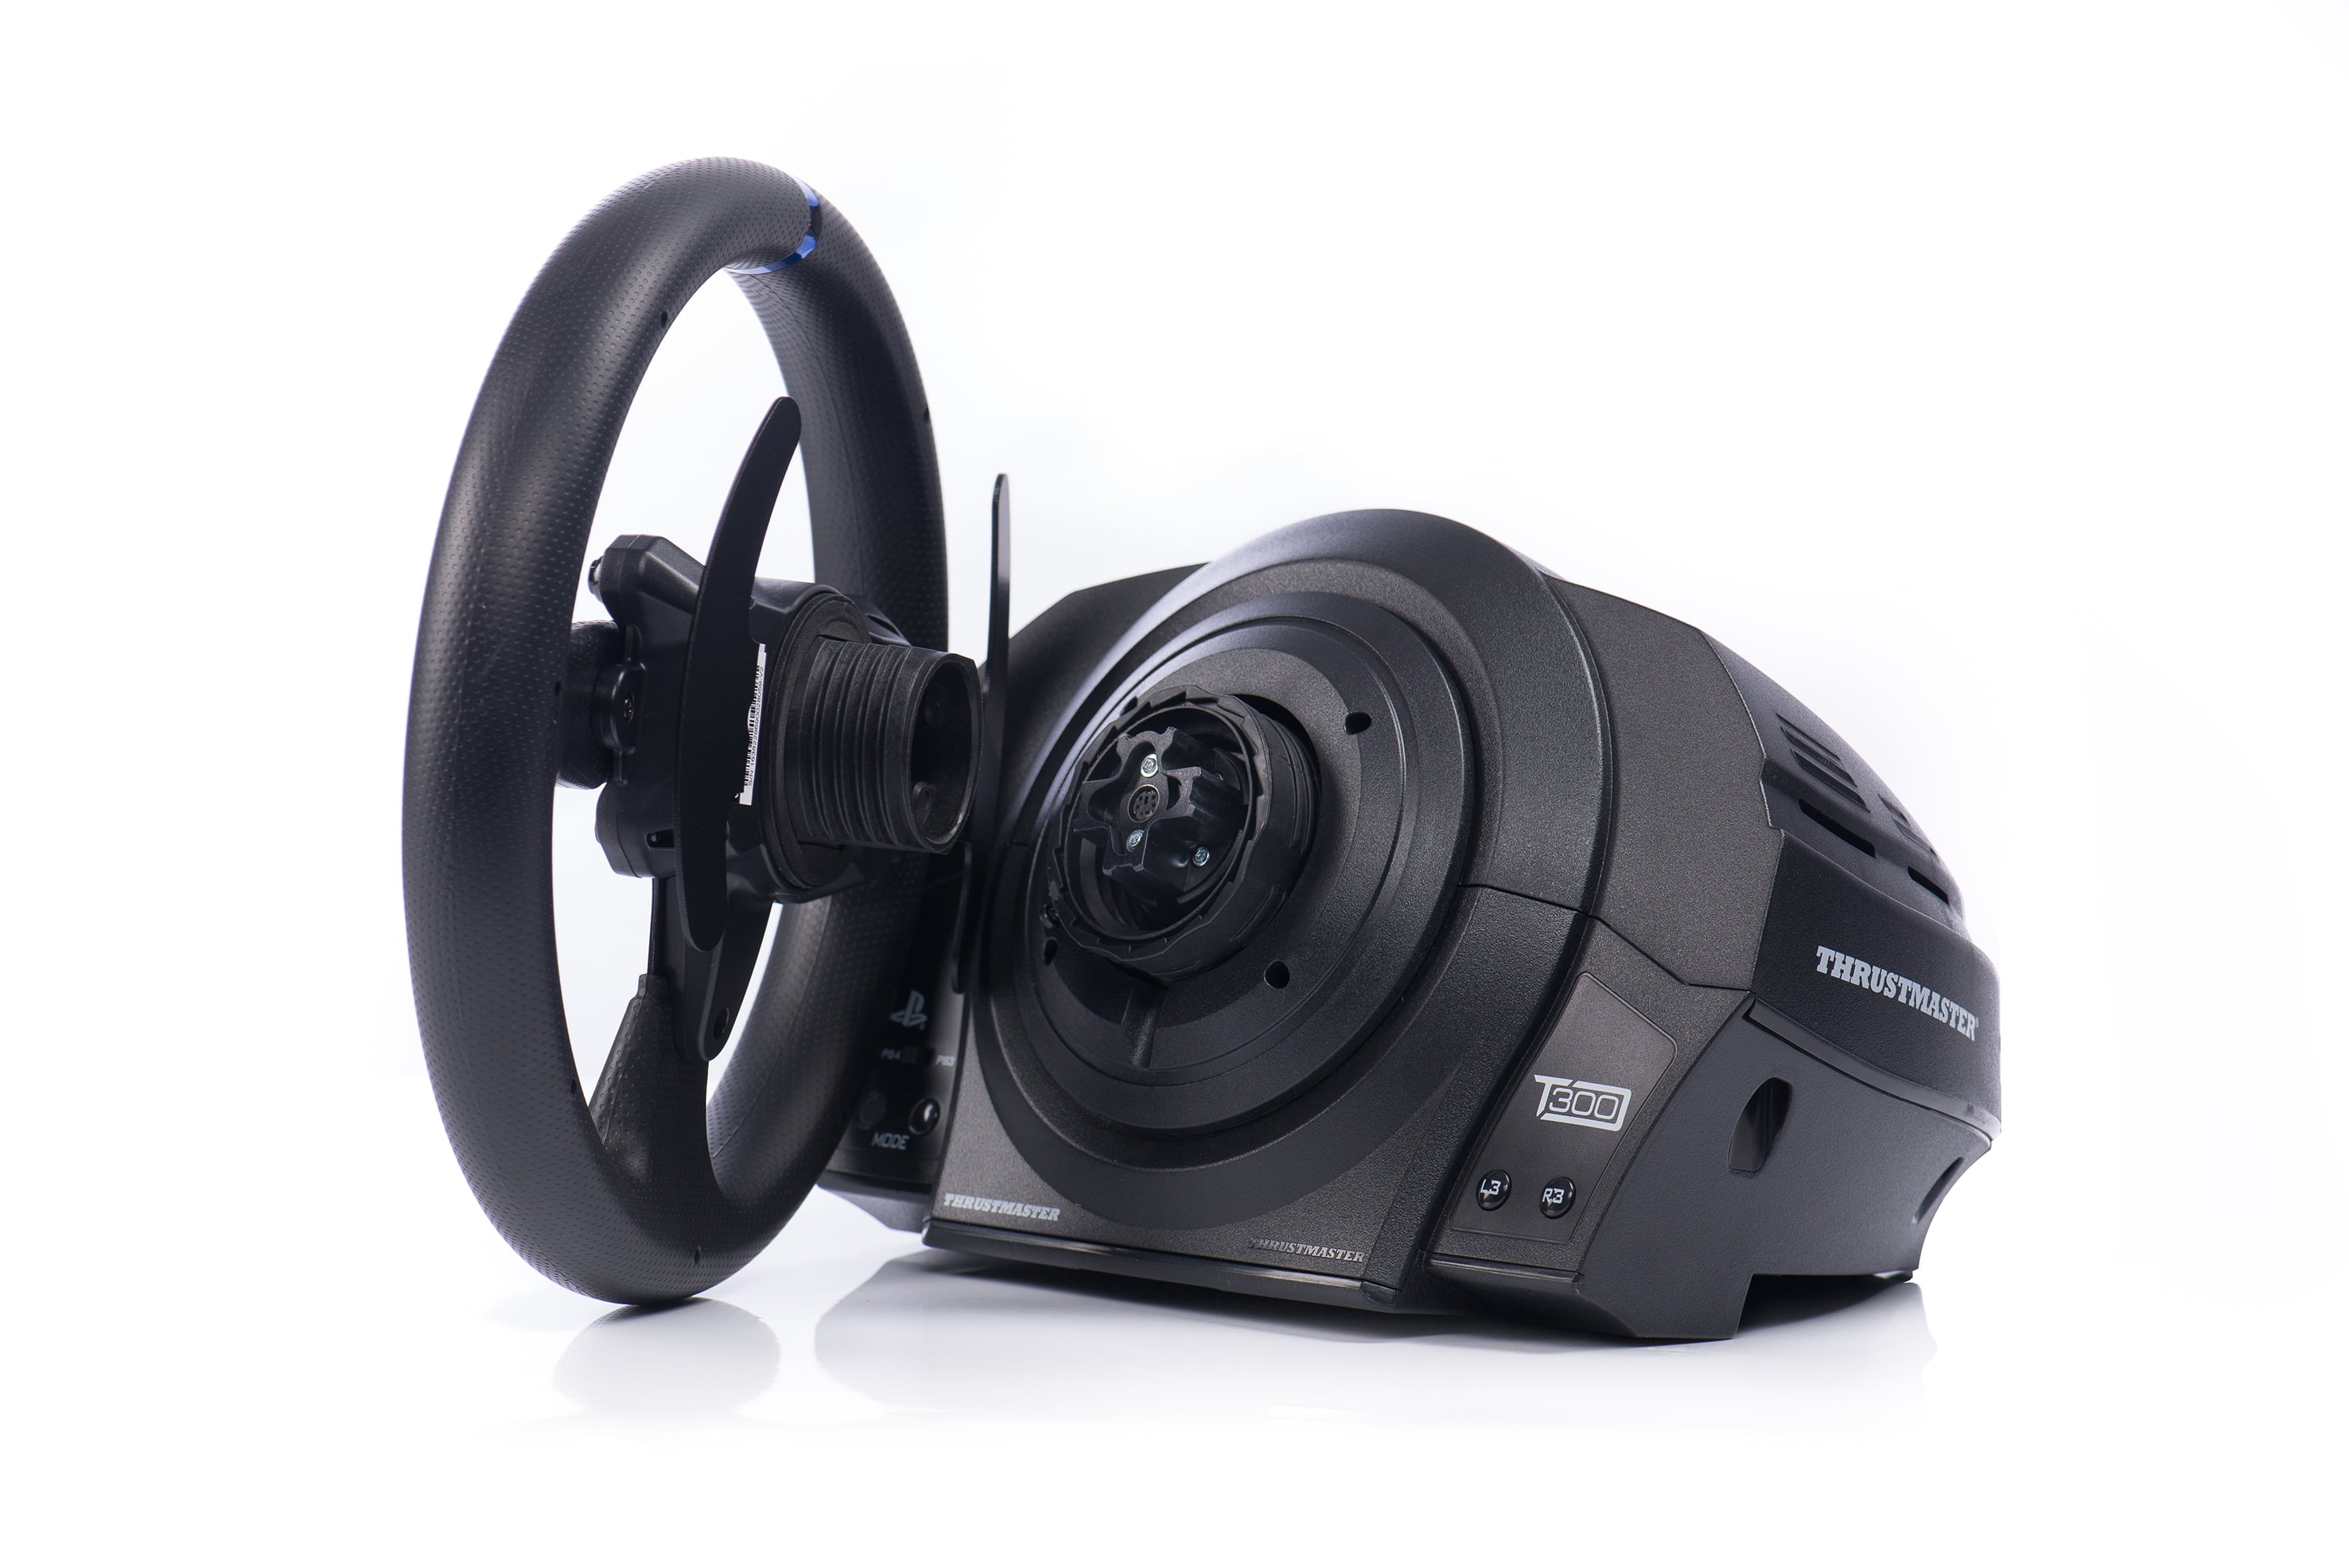 Thrustmaster T300 RS GT Edition Racing Wheel for PlayStation 4